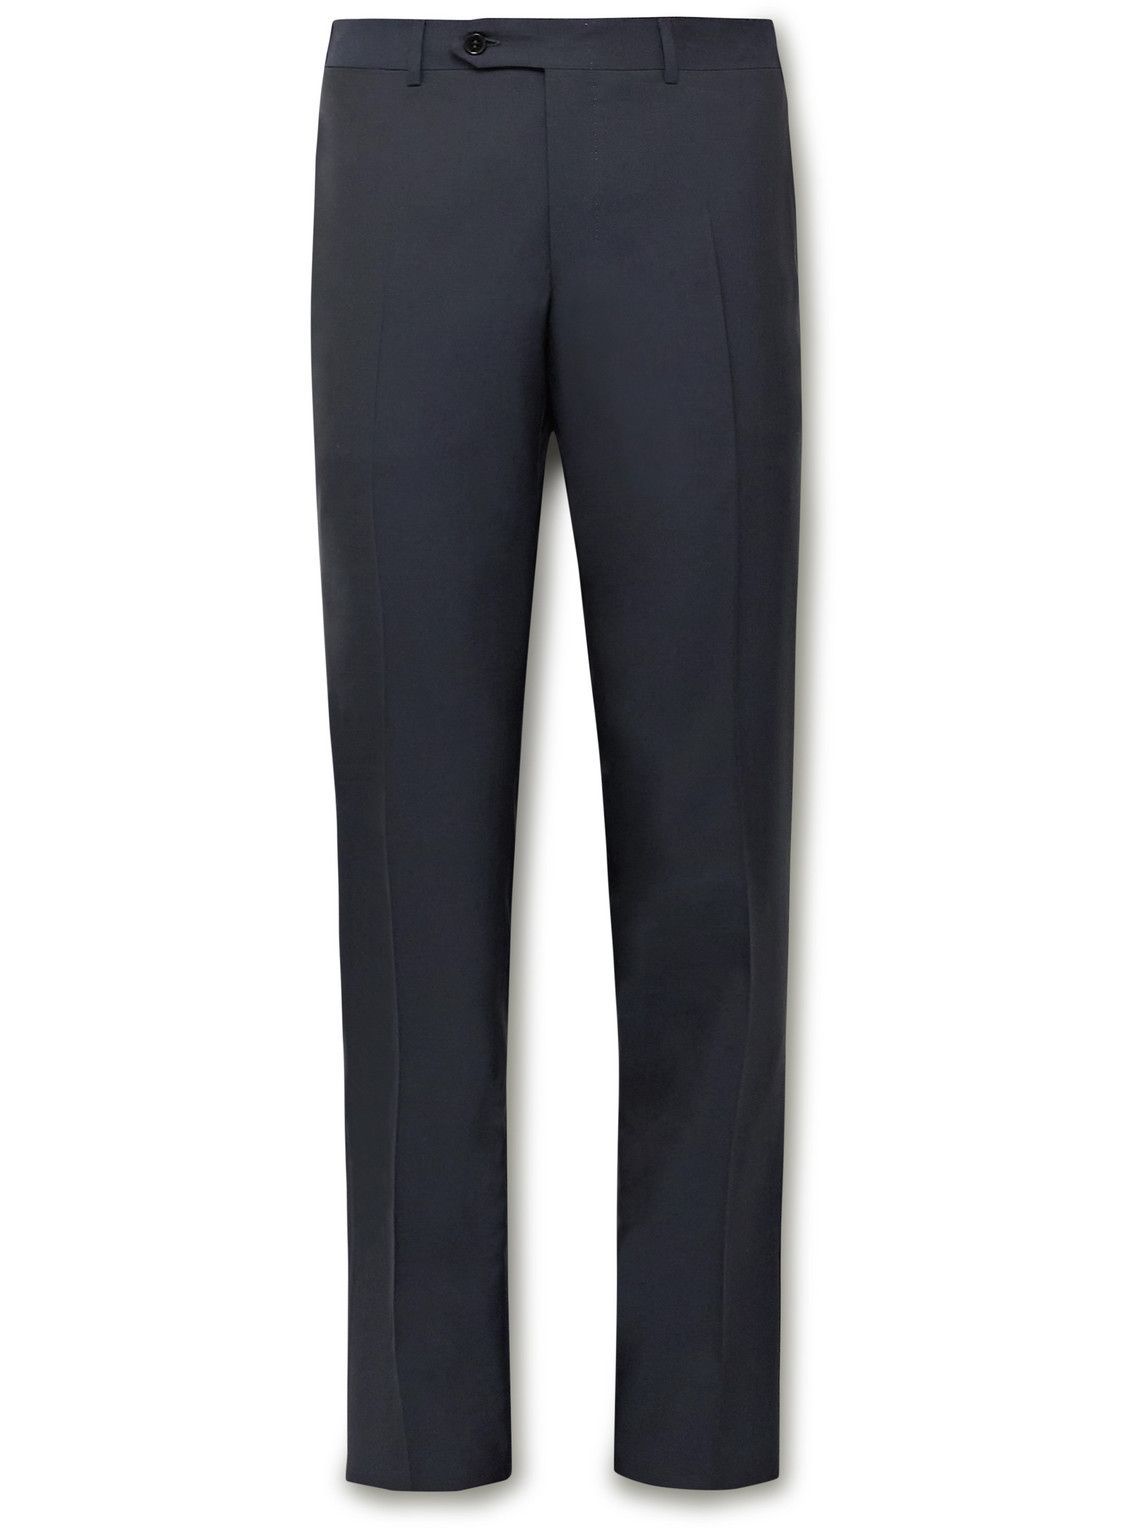 Canali - Slim-Fit Wool Suit Trousers - Blue Canali